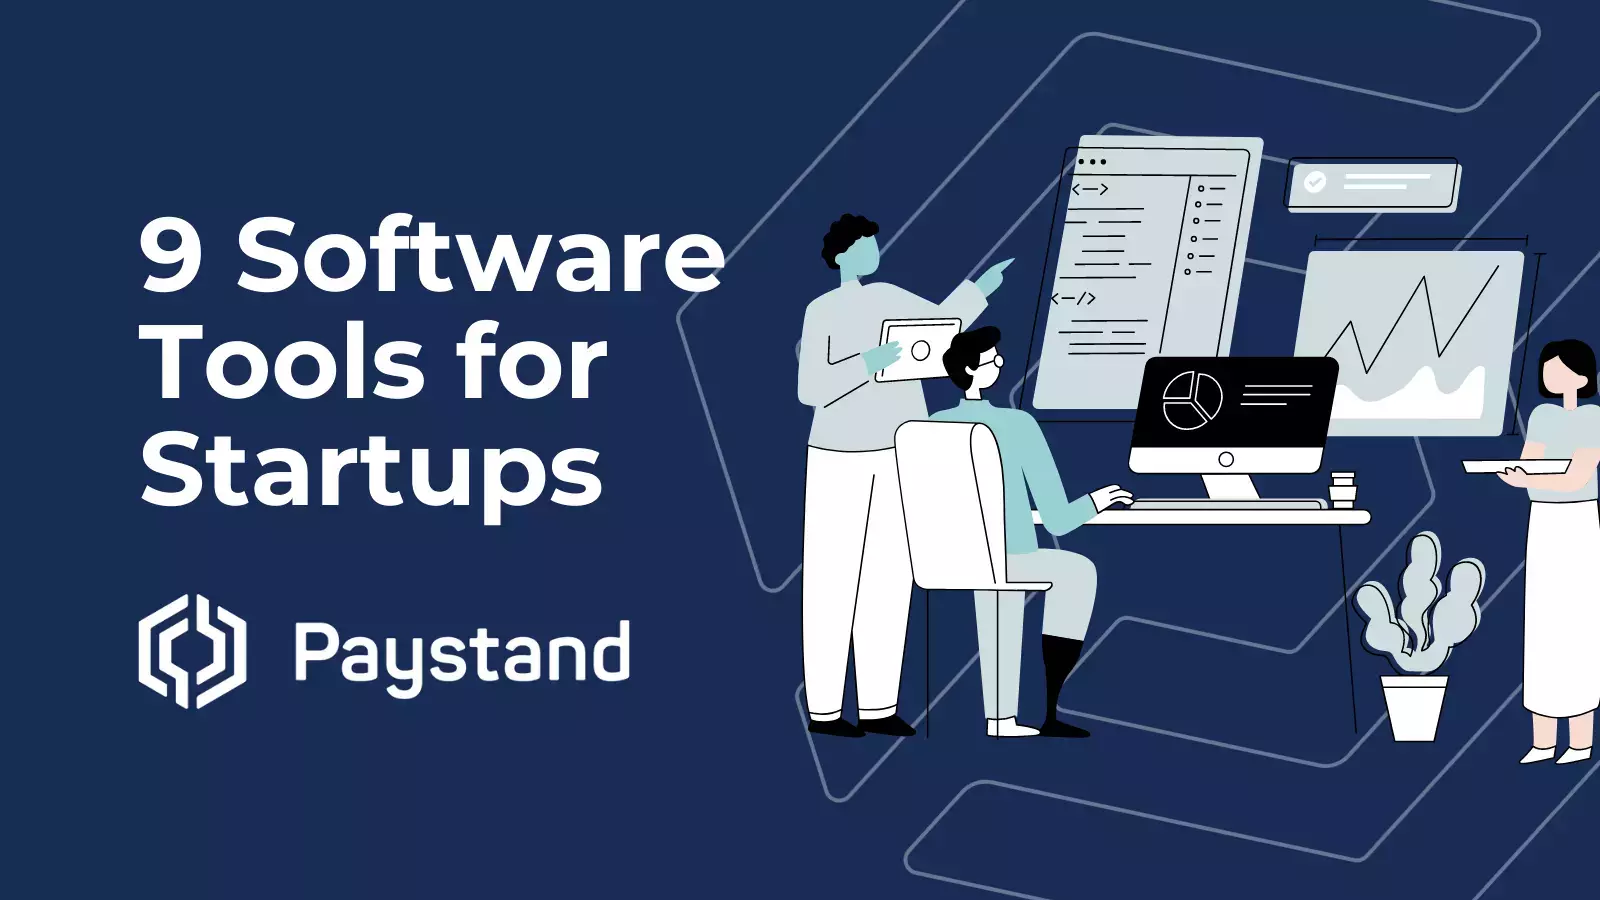 9 Software Tools for Startups